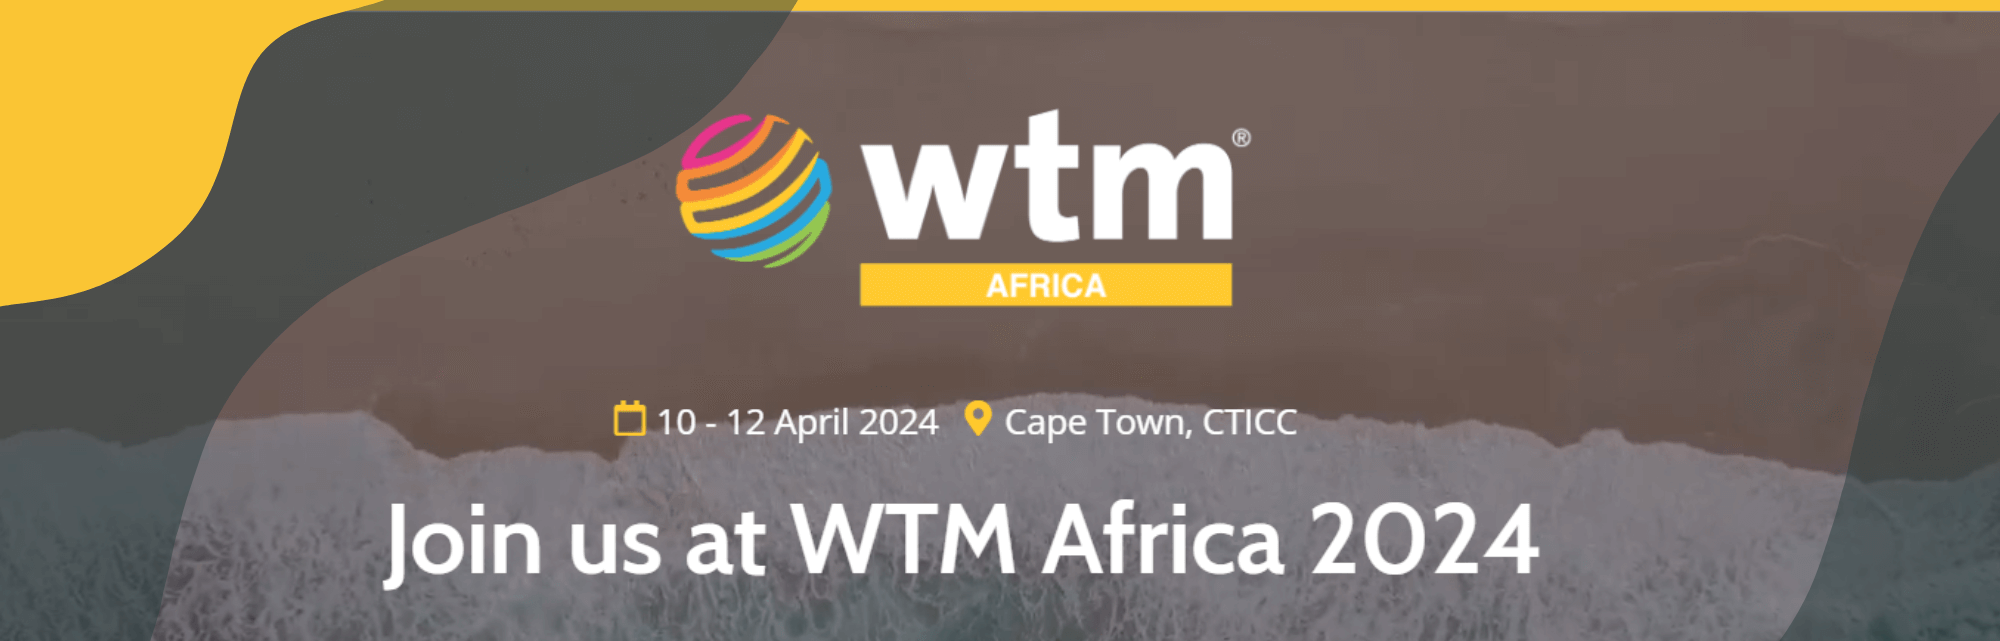 World Travel Market Africa - 10th to 12th April, 2024 - Cape Town CTICC